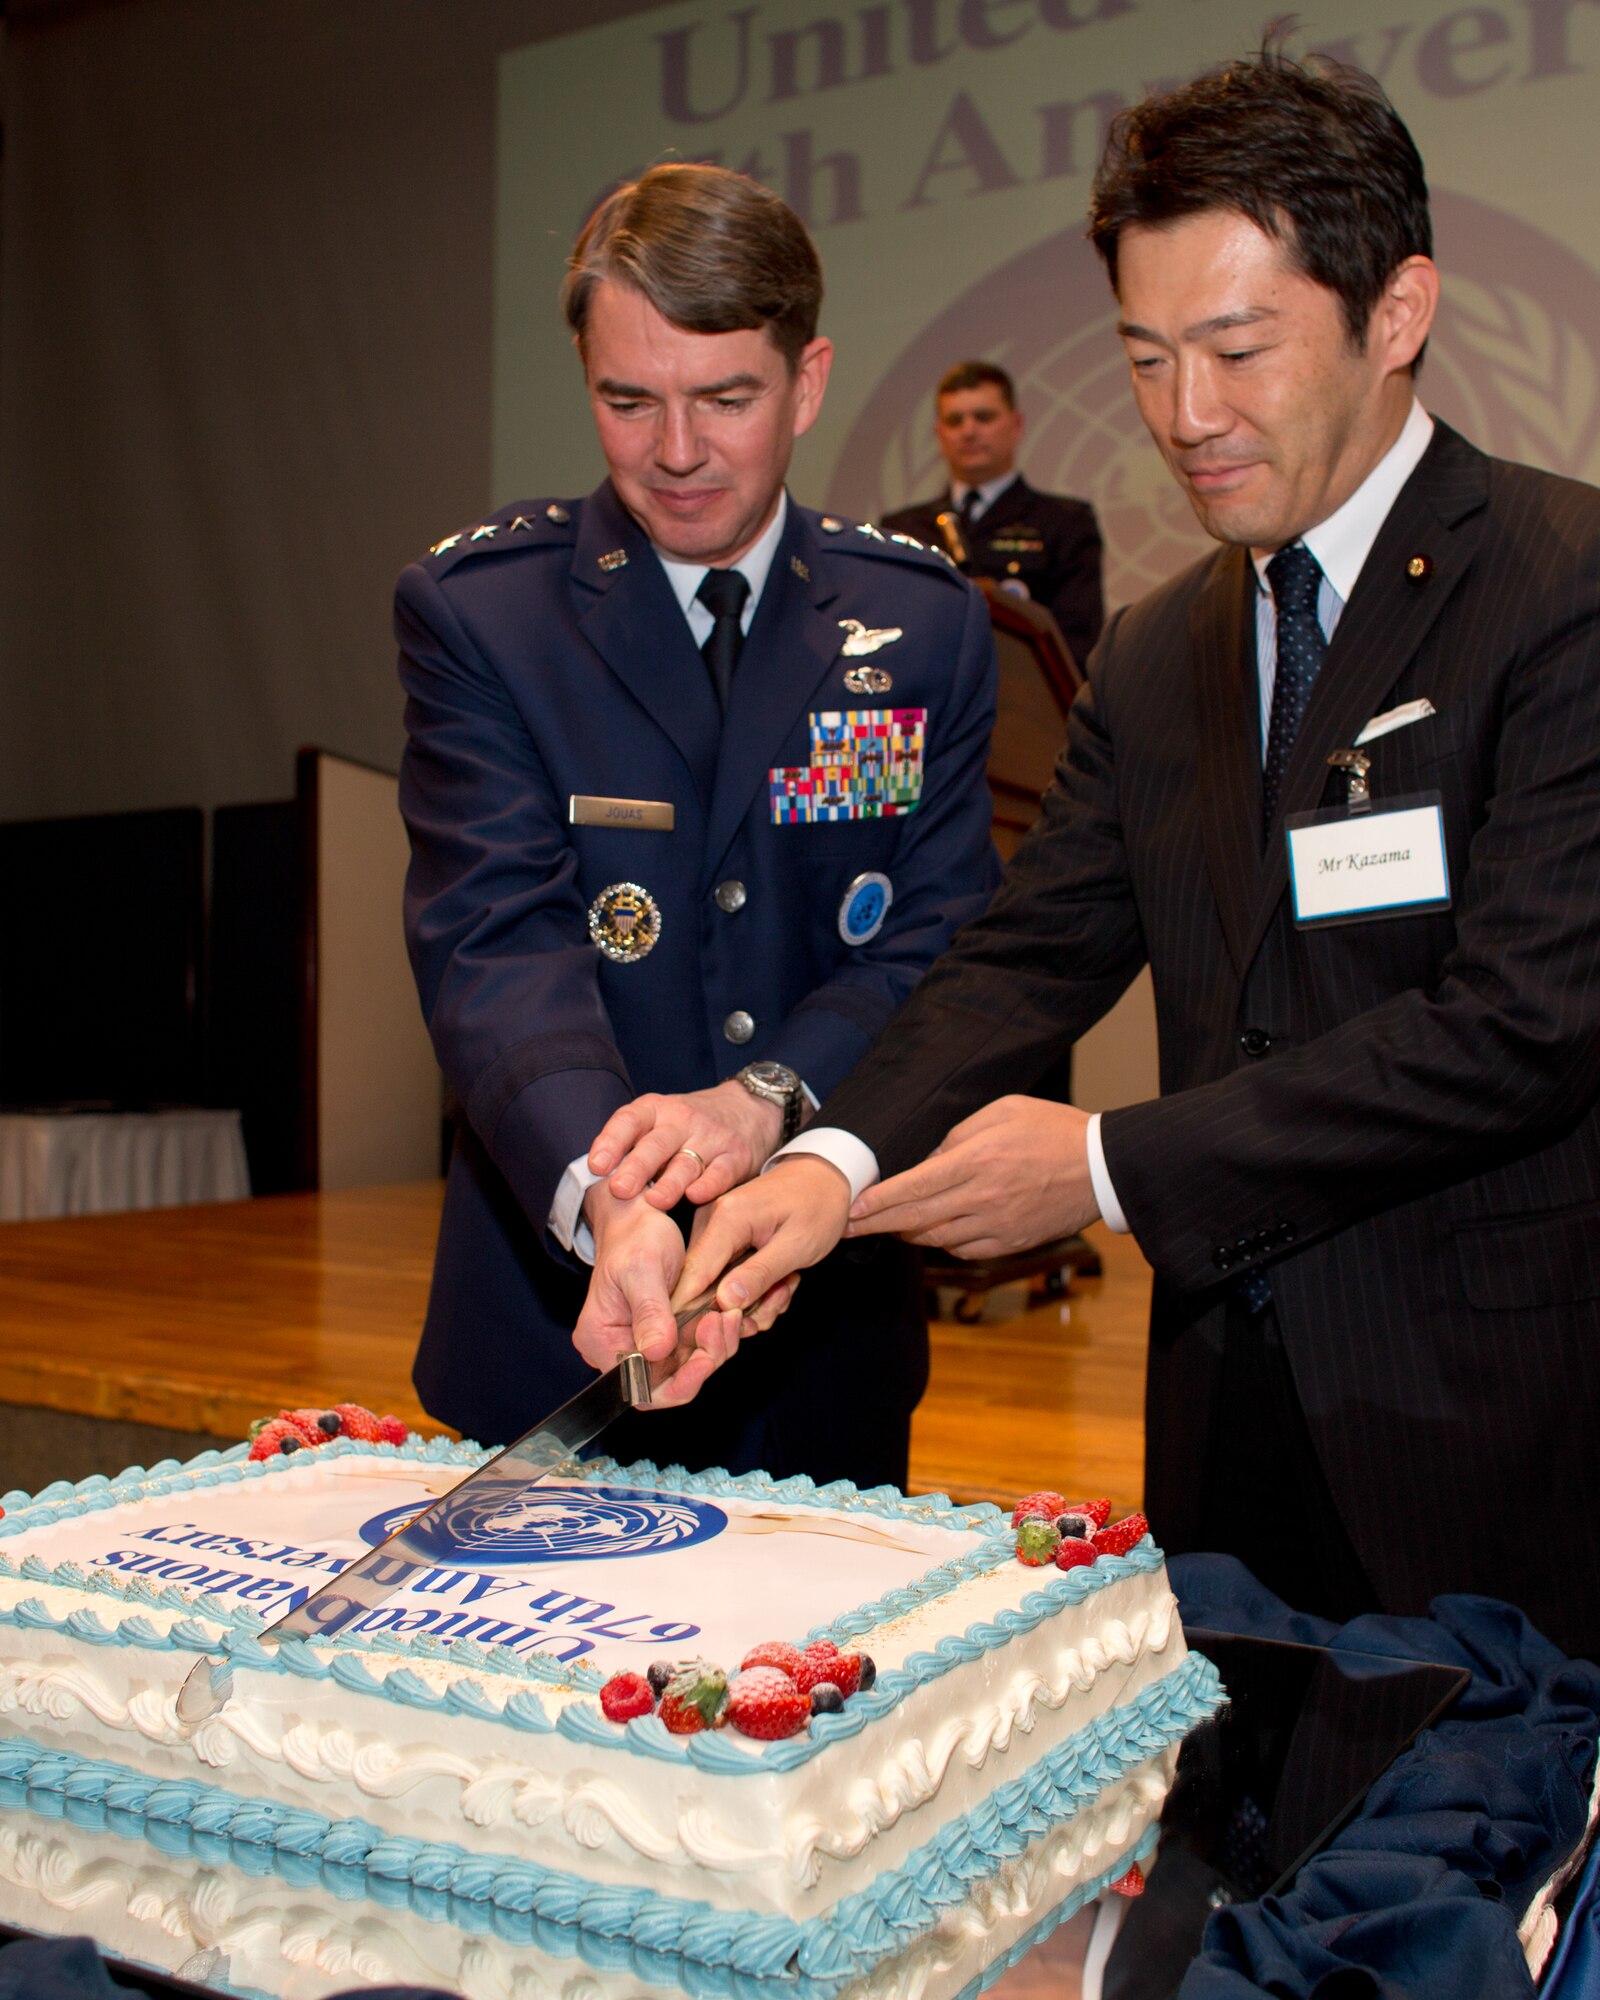 TOKYO, Japan -- (left to right) U.S. Air Force Lt. Gen. Jan-Marc Jouas, United Nations Command Korea, deputy commander, U.S. Forces Korea, deputy commander, Air Component Command, Republic of Korea/U.S. Combined Forces Command, commander, 7th Air Force, commander, and Naoki Kazama, Vice-Minister for Foreign Affairs of Japan, cut the ceremonial cake to commemorate the 67th Anniversary of the United Nations, Nov. 29, 2012 at New Sanno Hotel. (U.S. Air Force photo by Osakabe Yasuo) 